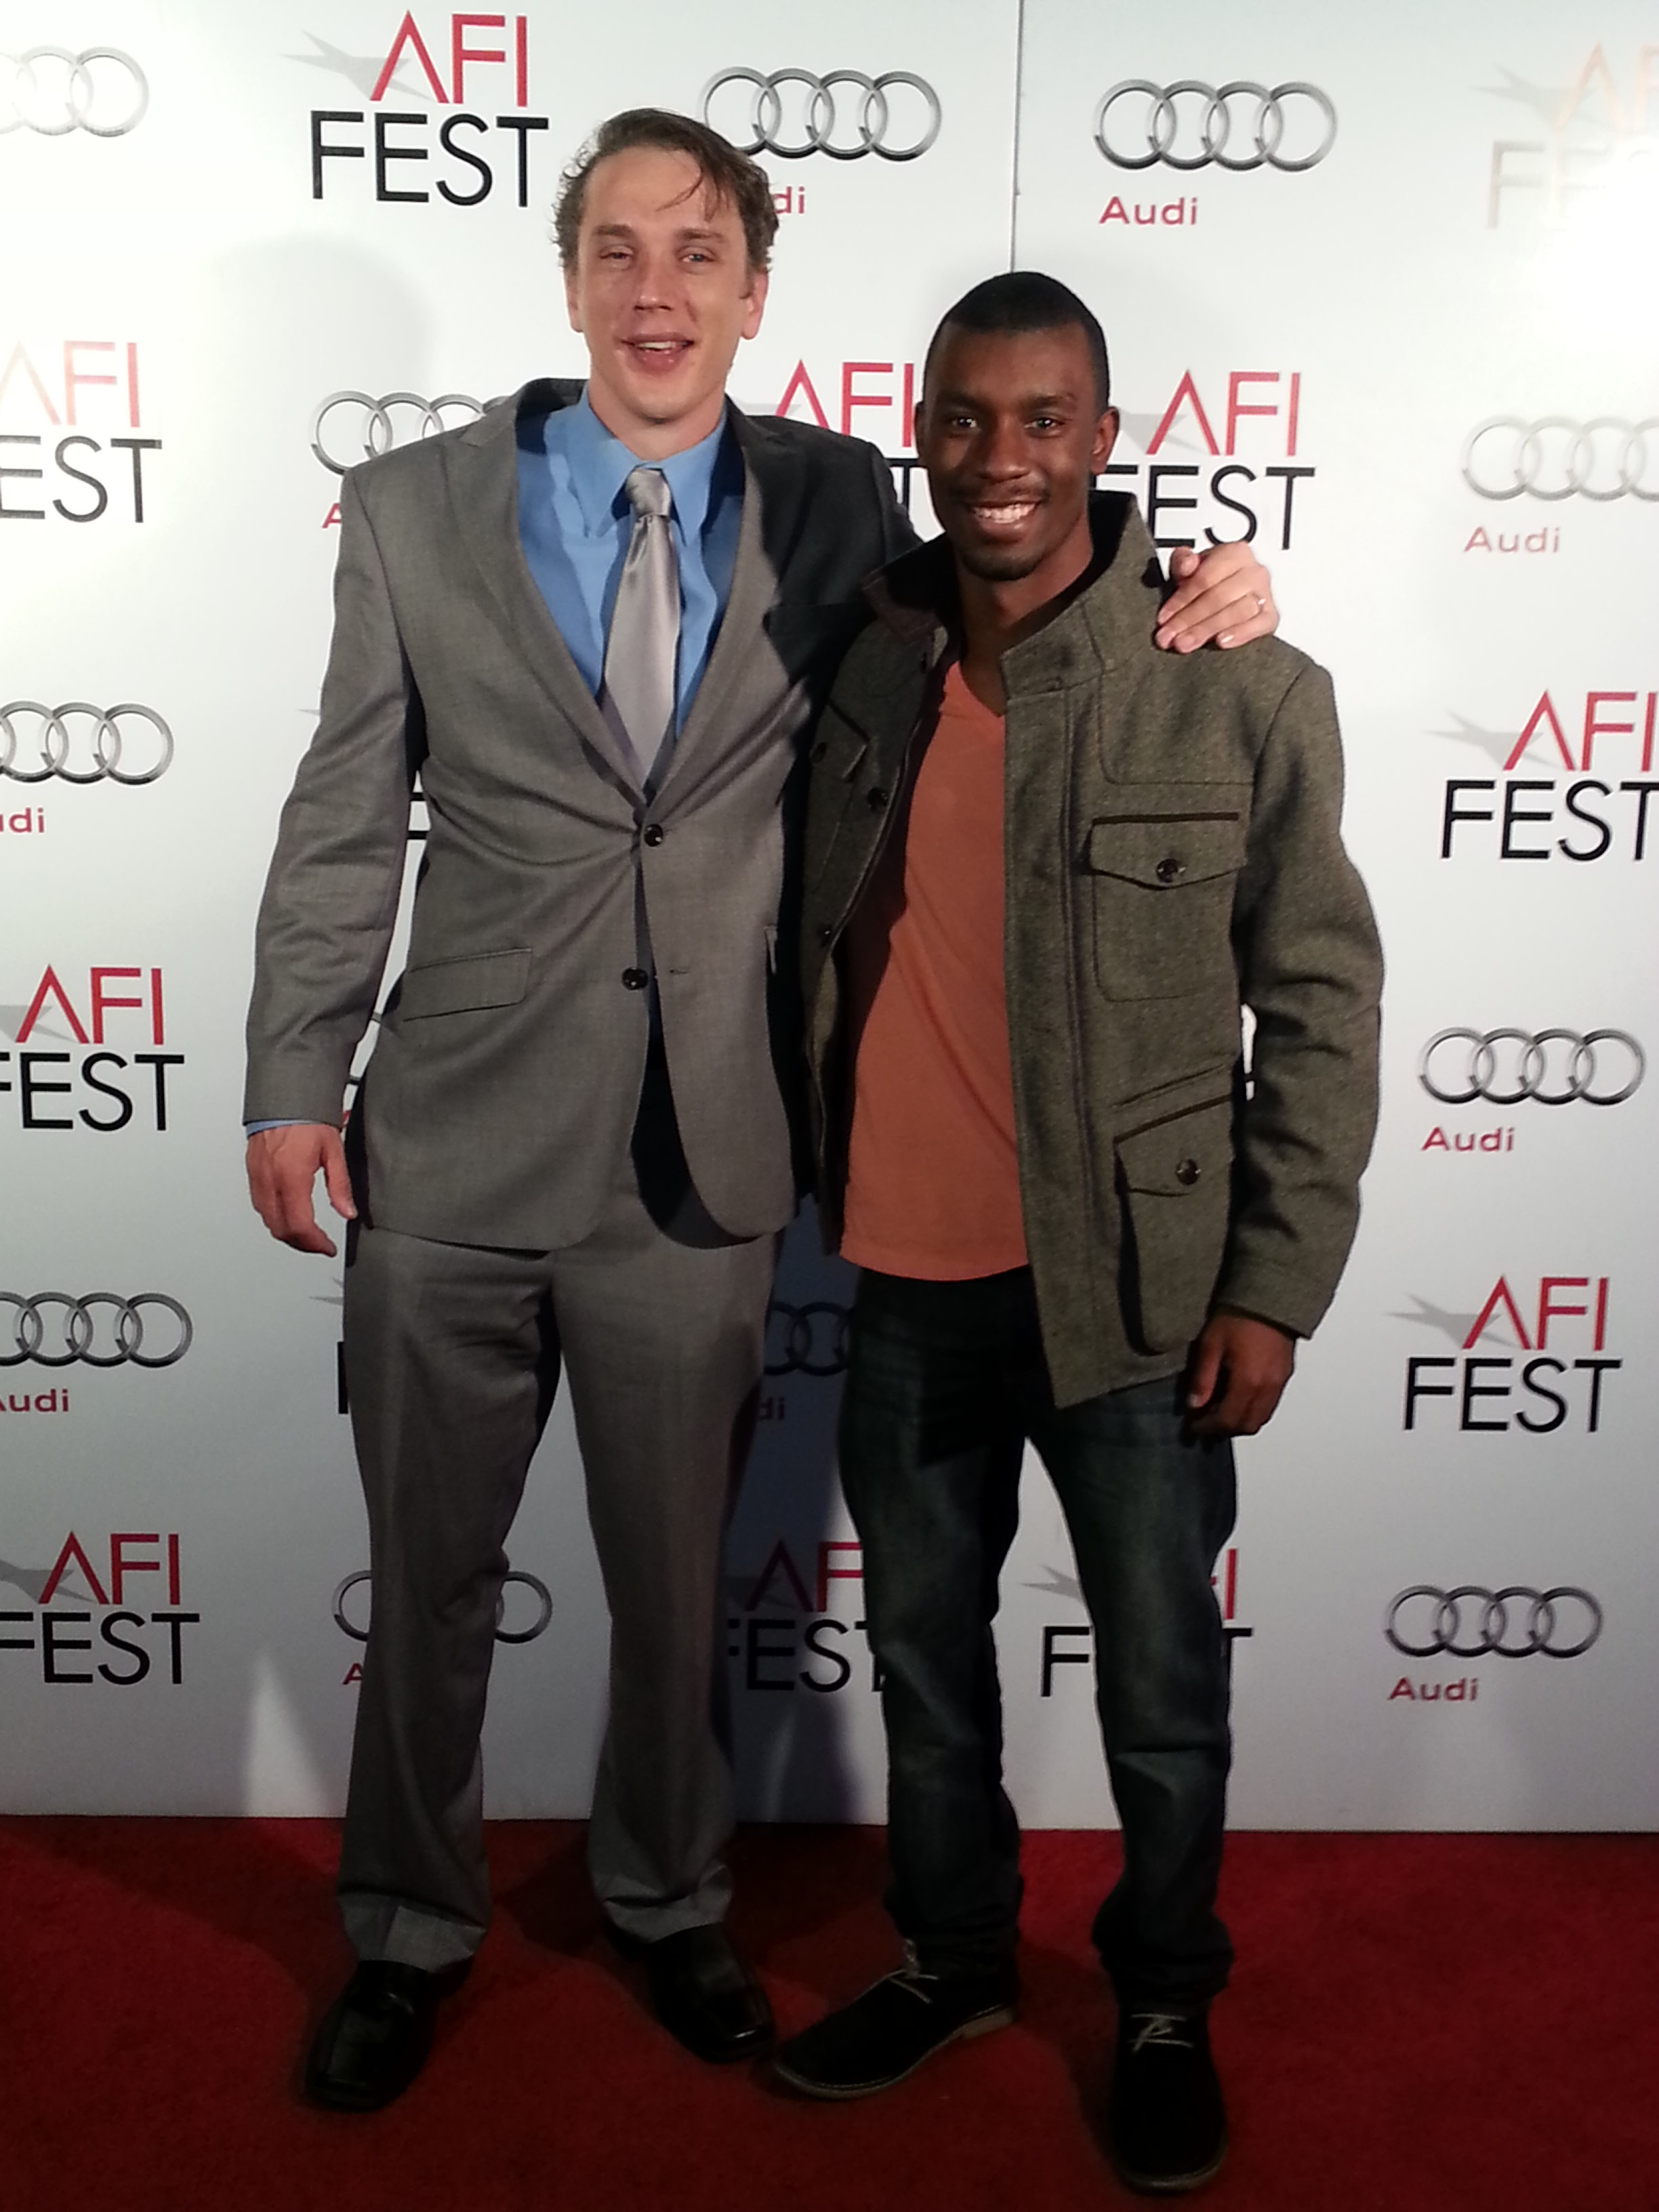 Byron James and Richie Stephens at AFI's red carpet premiere of Mandela: Long Walk to Freedom